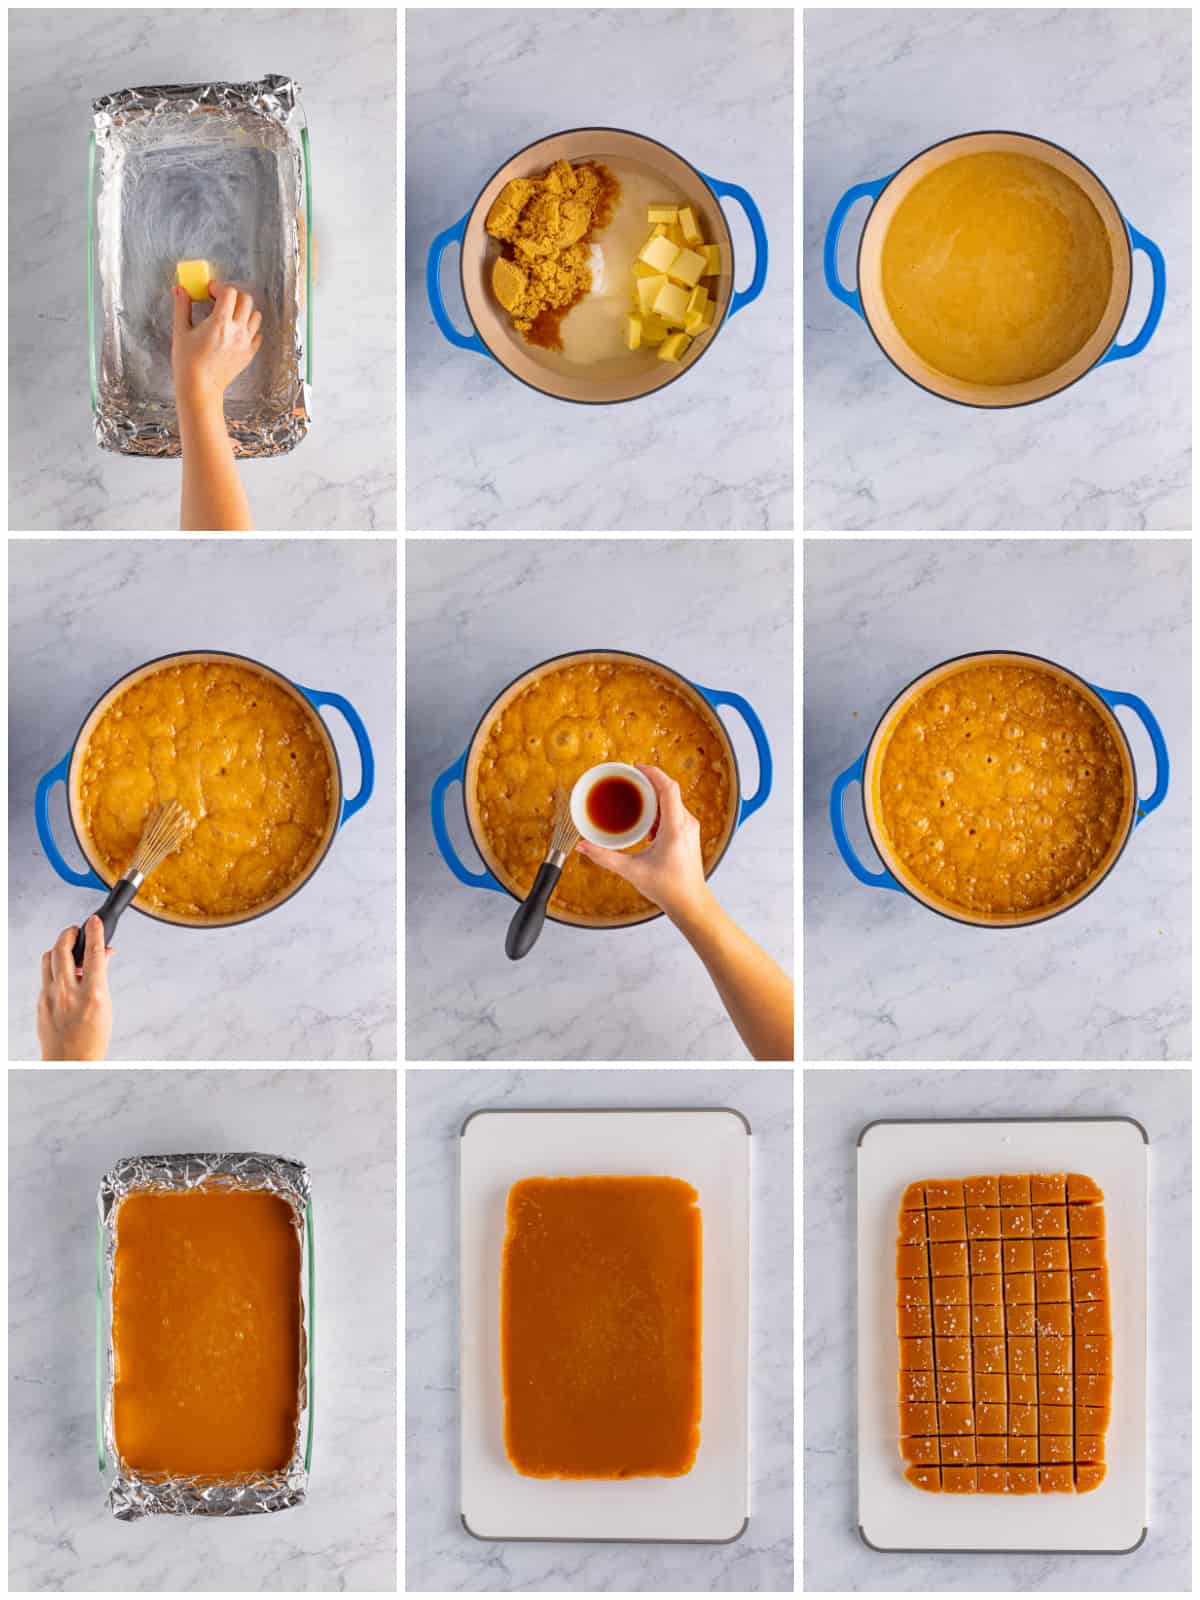 Step by step photos on how to make Homemade Caramels.